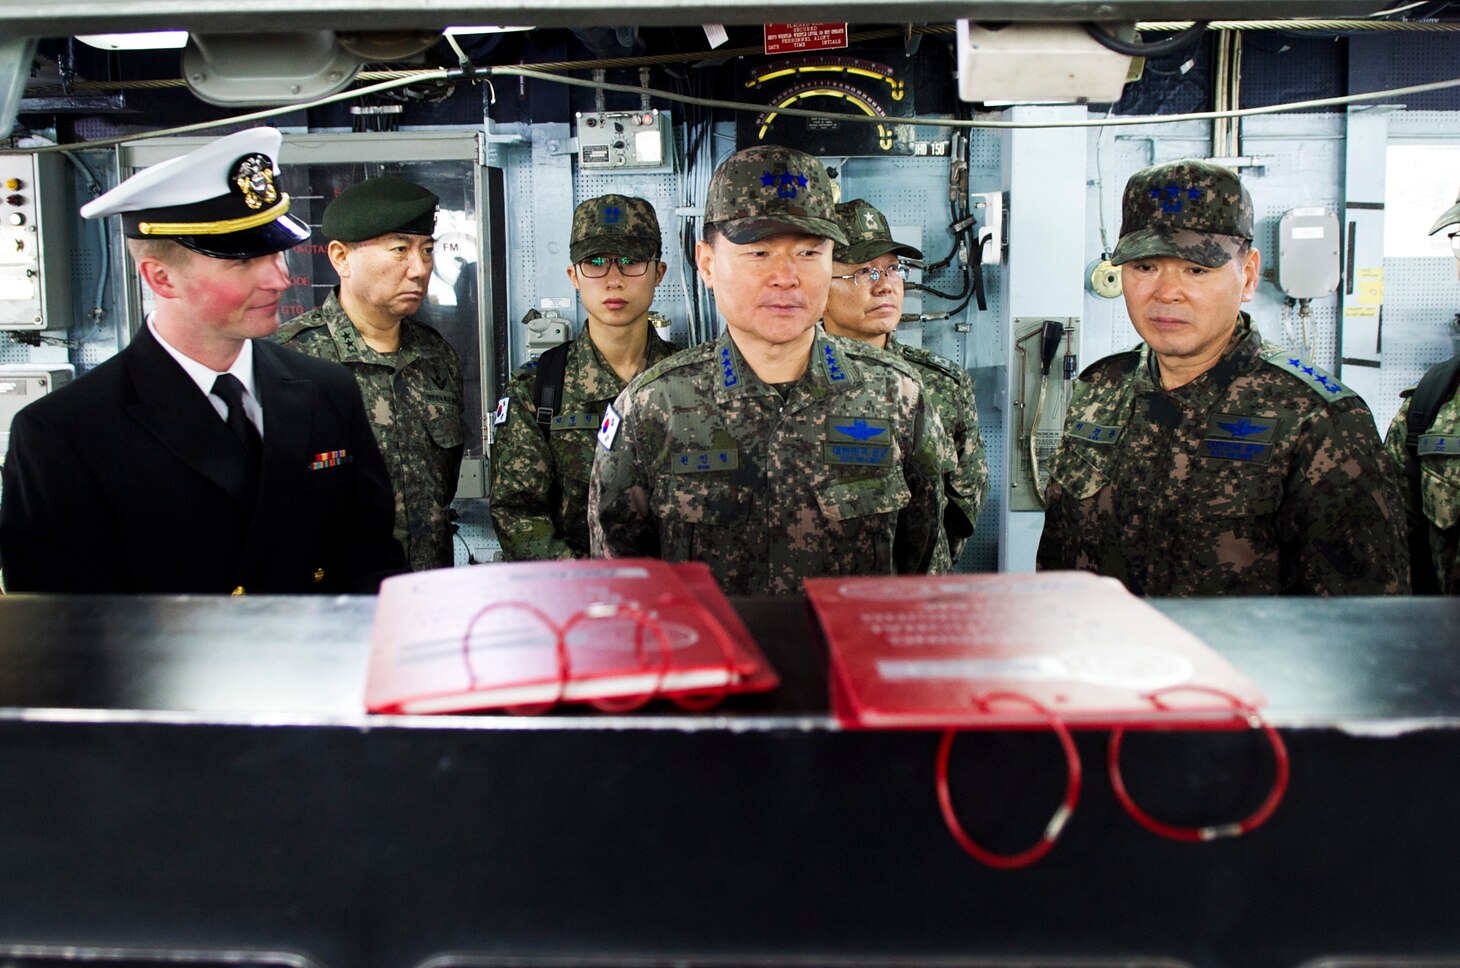 YOKOSUKA, Japan (Jan. 15, 2019) Ensign Ben Pershall, Lt. Gen. Inchoul Won, vice chairman of the Republic of Korea Joint Chiefs of Staff, center, and Lt. Gen. Keonwan Lee discuss the helm aboard the Arleigh Burke-class guided-missile destroyer USS Barry (DDG 52) during a ship tour. Barry is forward-deployed to the U.S. 7th Fleet area of operations in support of security and stability in the Indo-Pacific region.